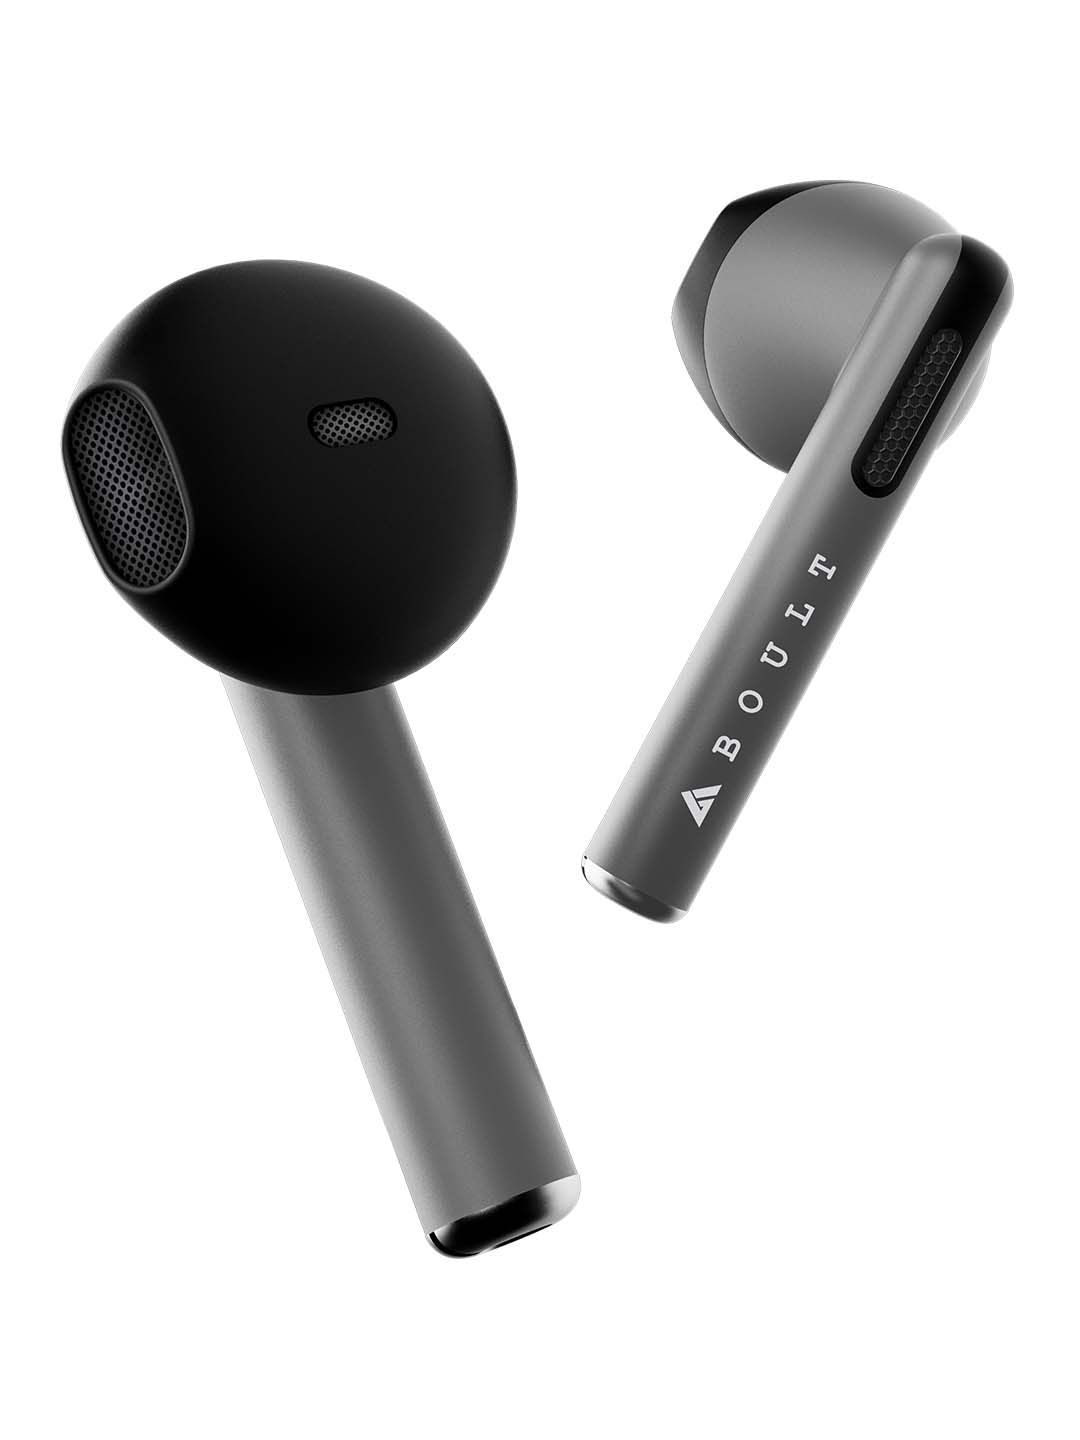 BOULT AUDIO Xpods True Wireless Earbuds - Black Price in India